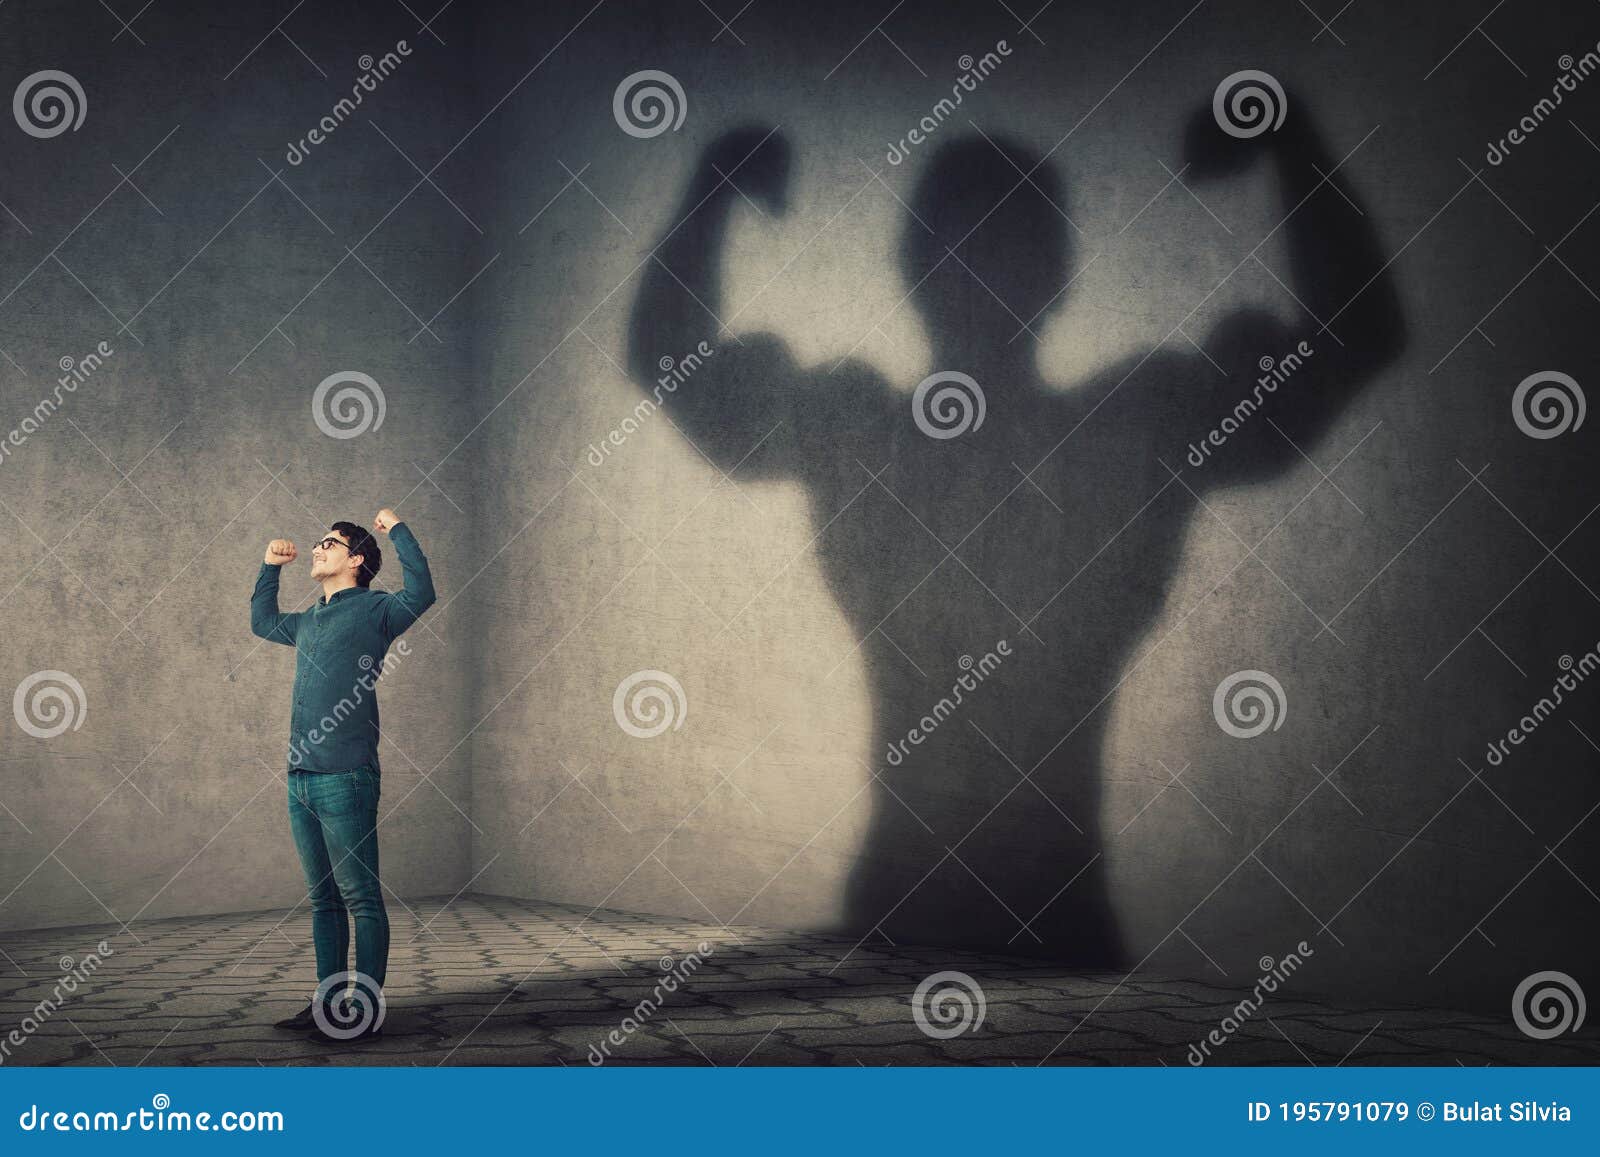 confident man flexing muscles imagine super power as casting a shadow of muscular bodybuilder showing biceps. strong person facing